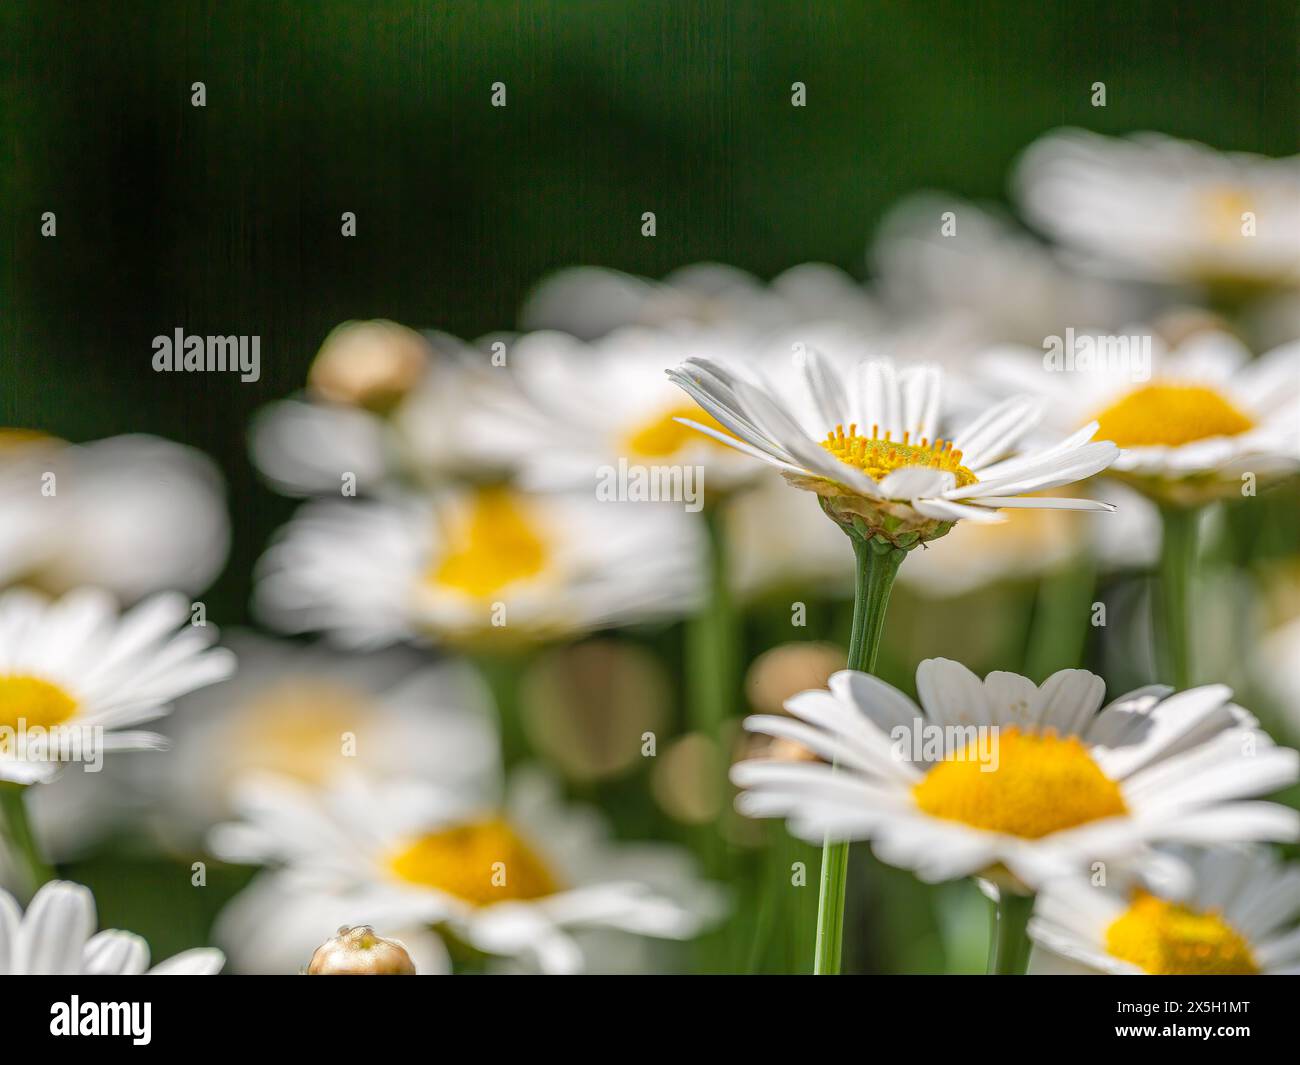 Close-up of wild daisy flowers (Leucanthemum vulgare), white chamomiles with others in a blurred background. Stock Photo